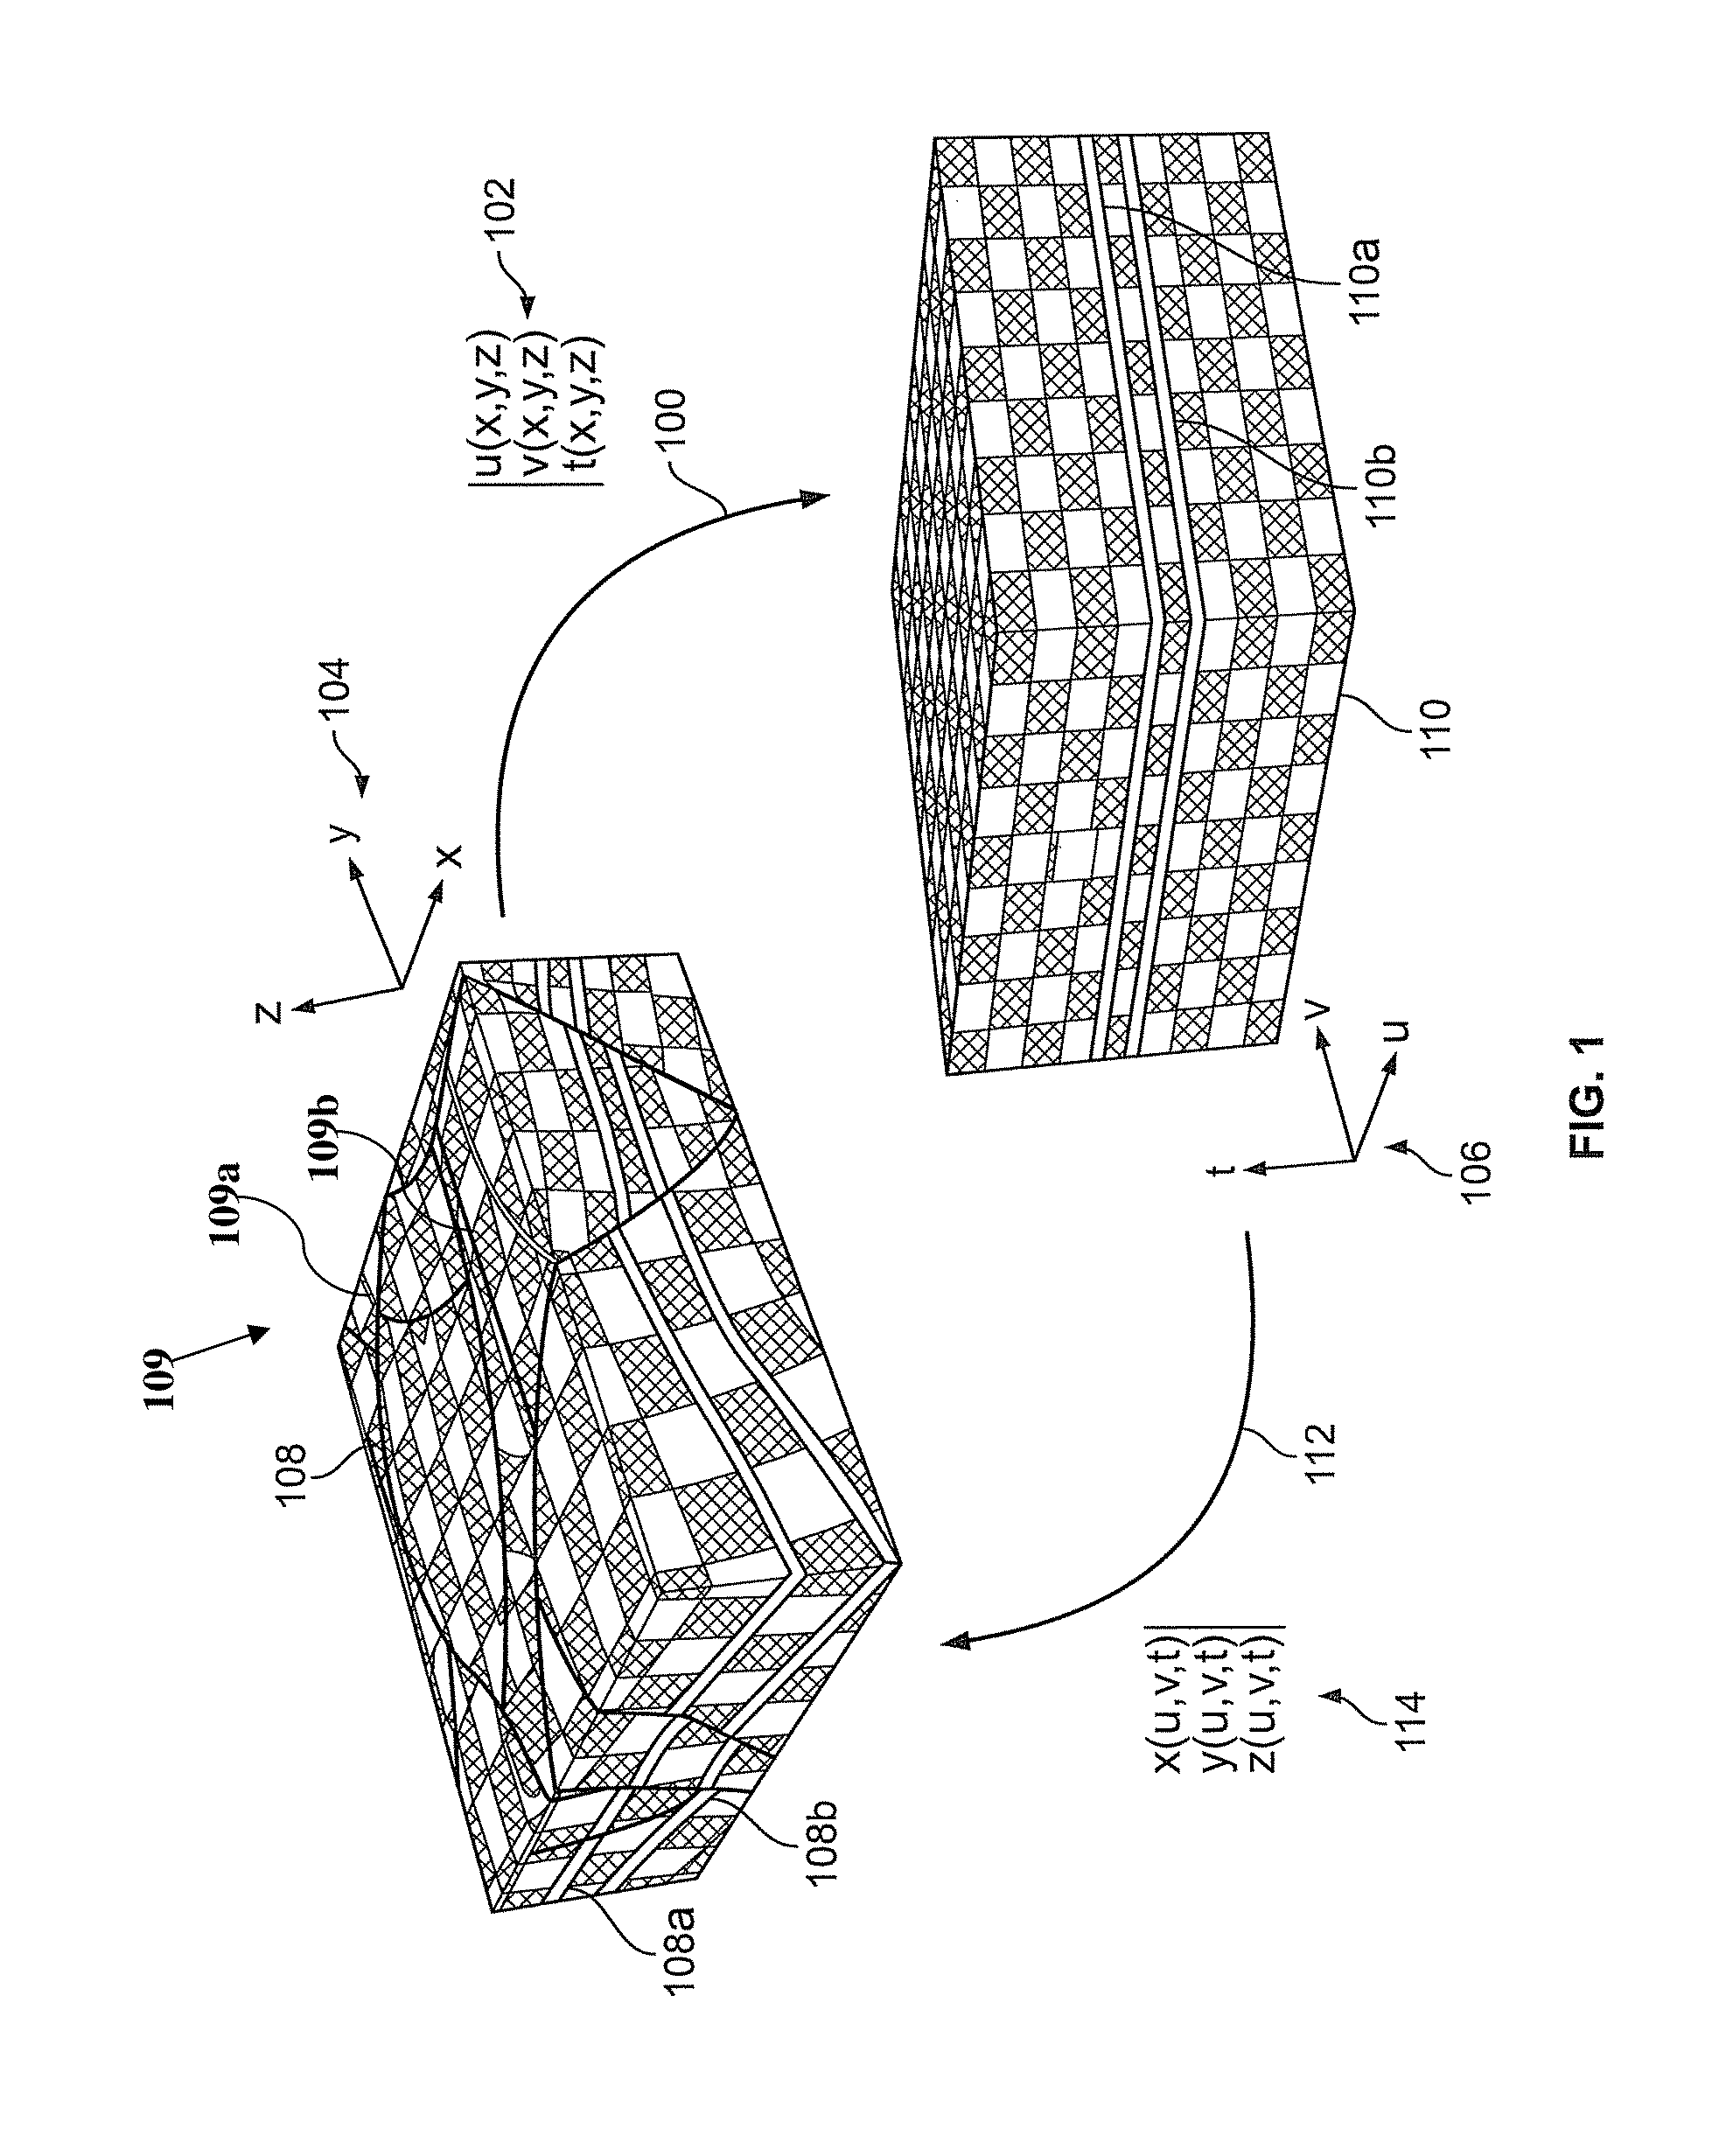 Systems and methods for coordinated editing of seismic data in dual model